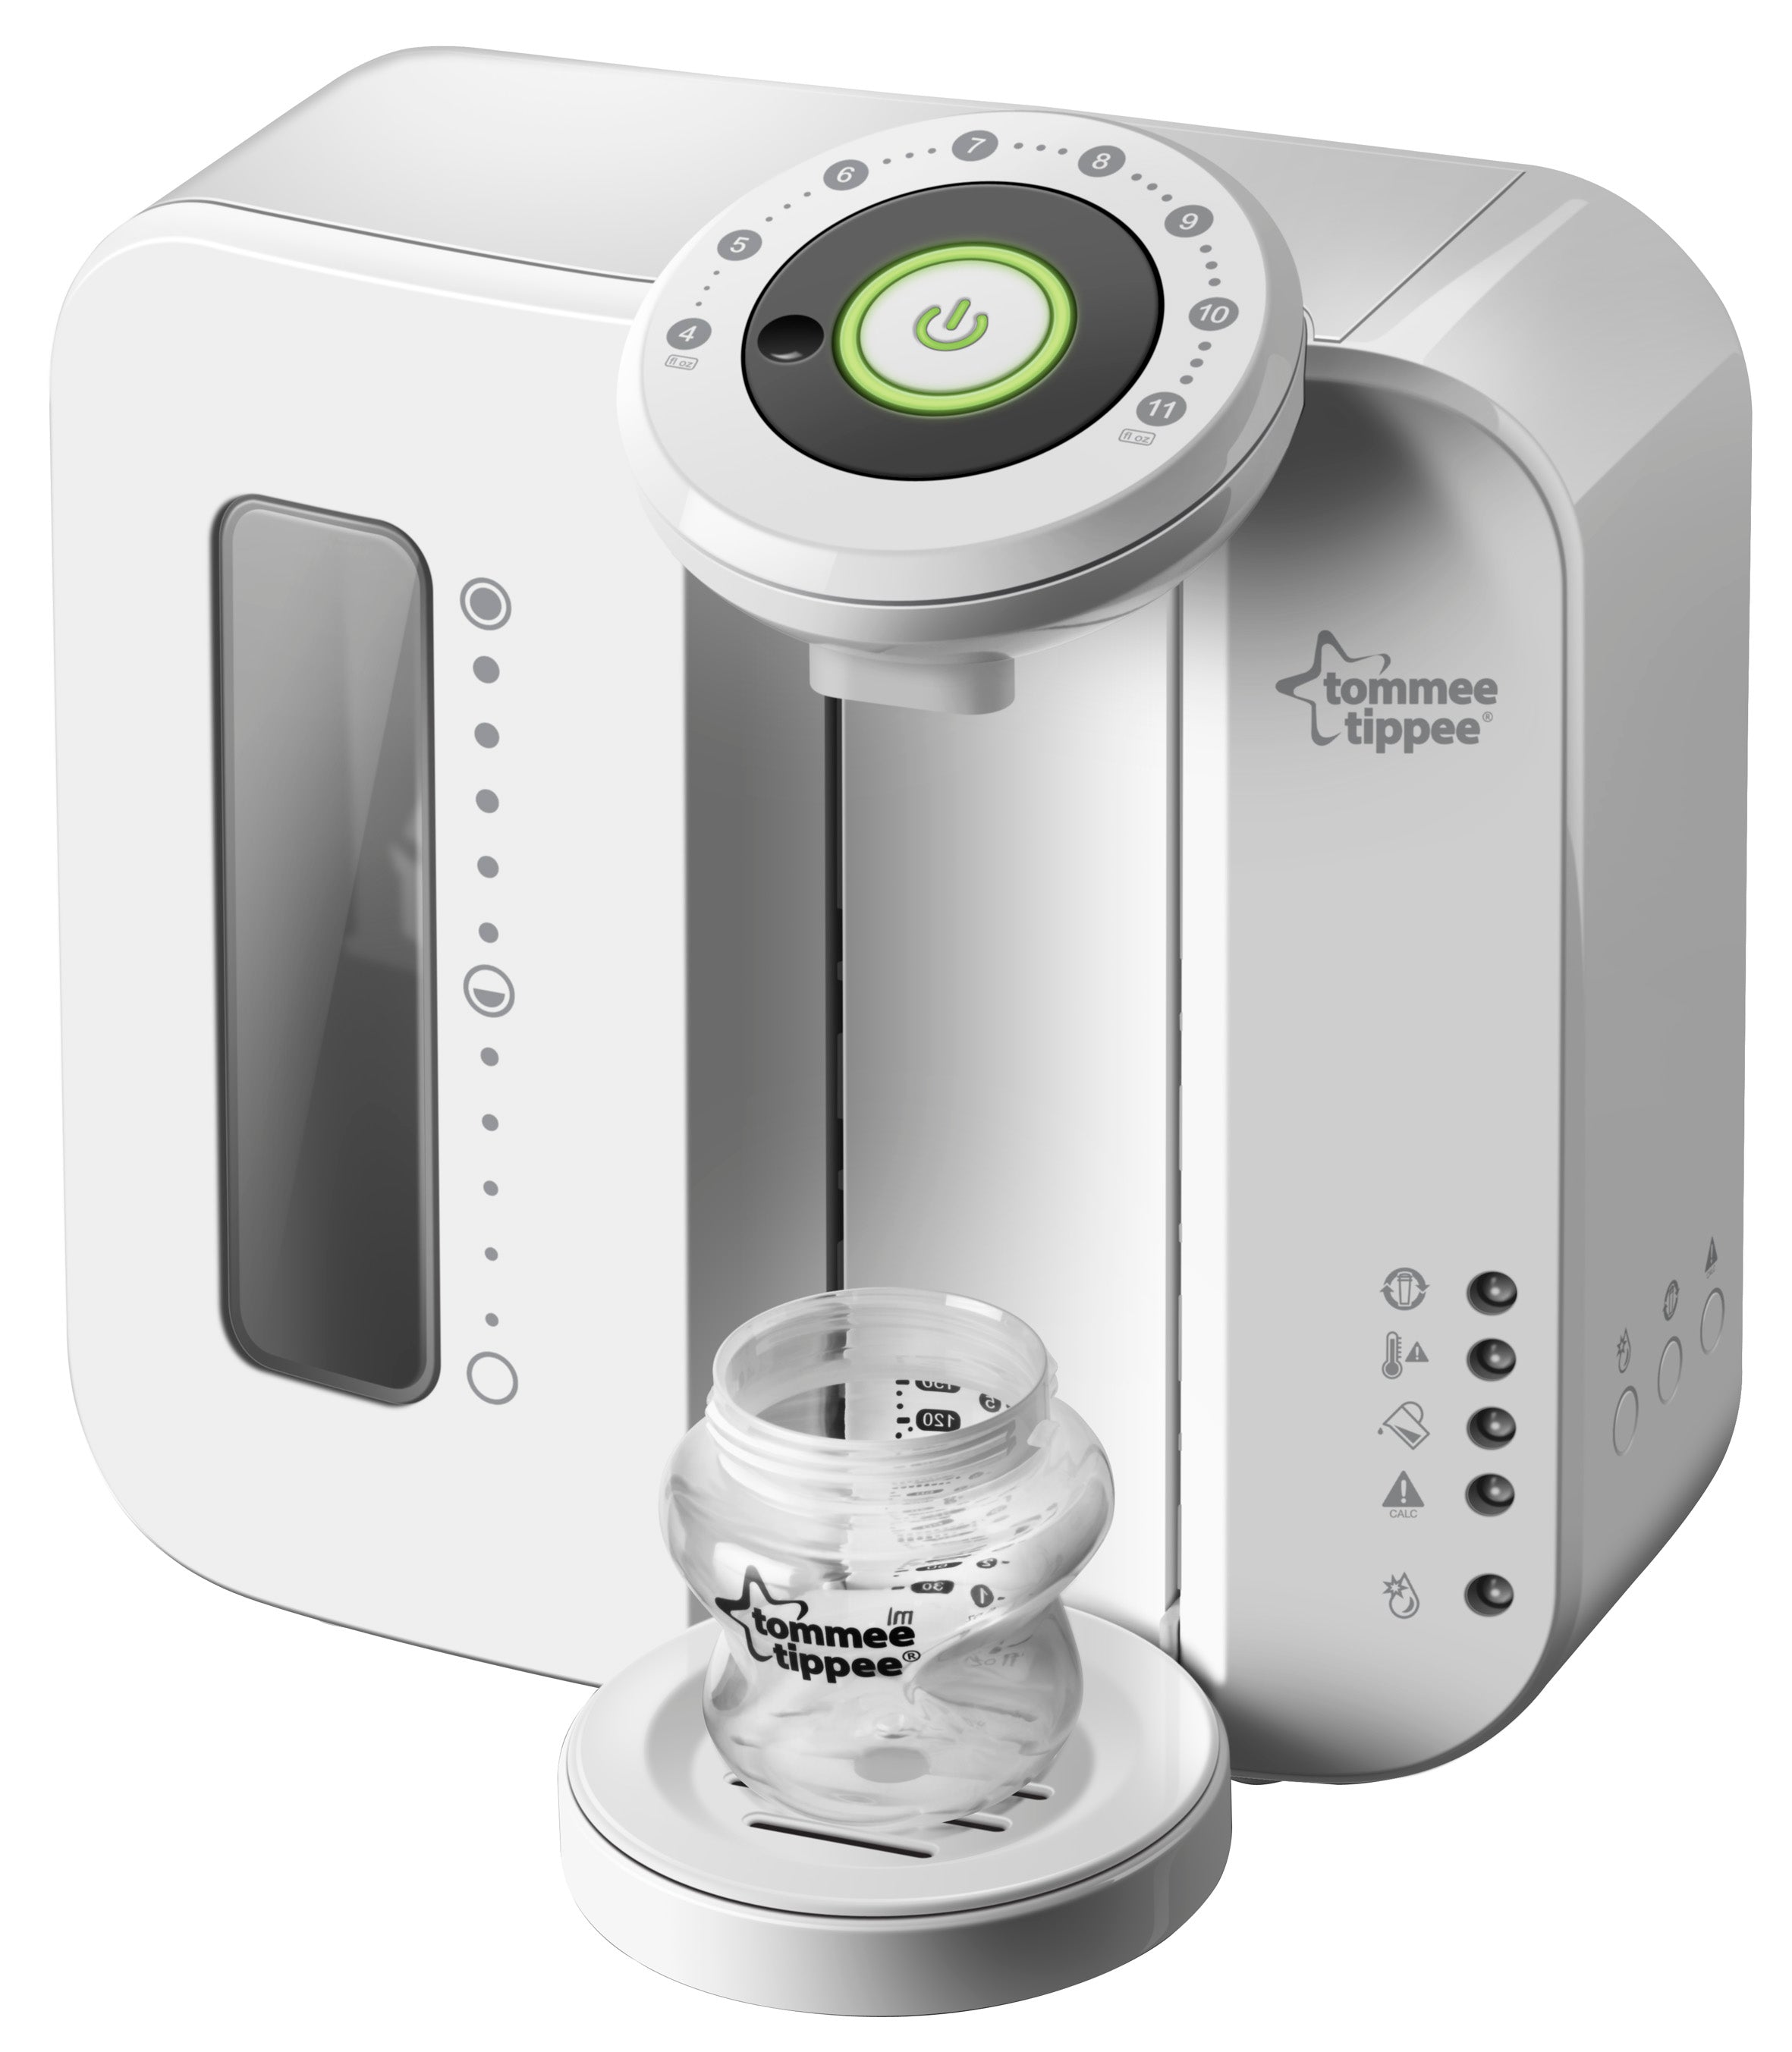 tommee tippee prep machine offers